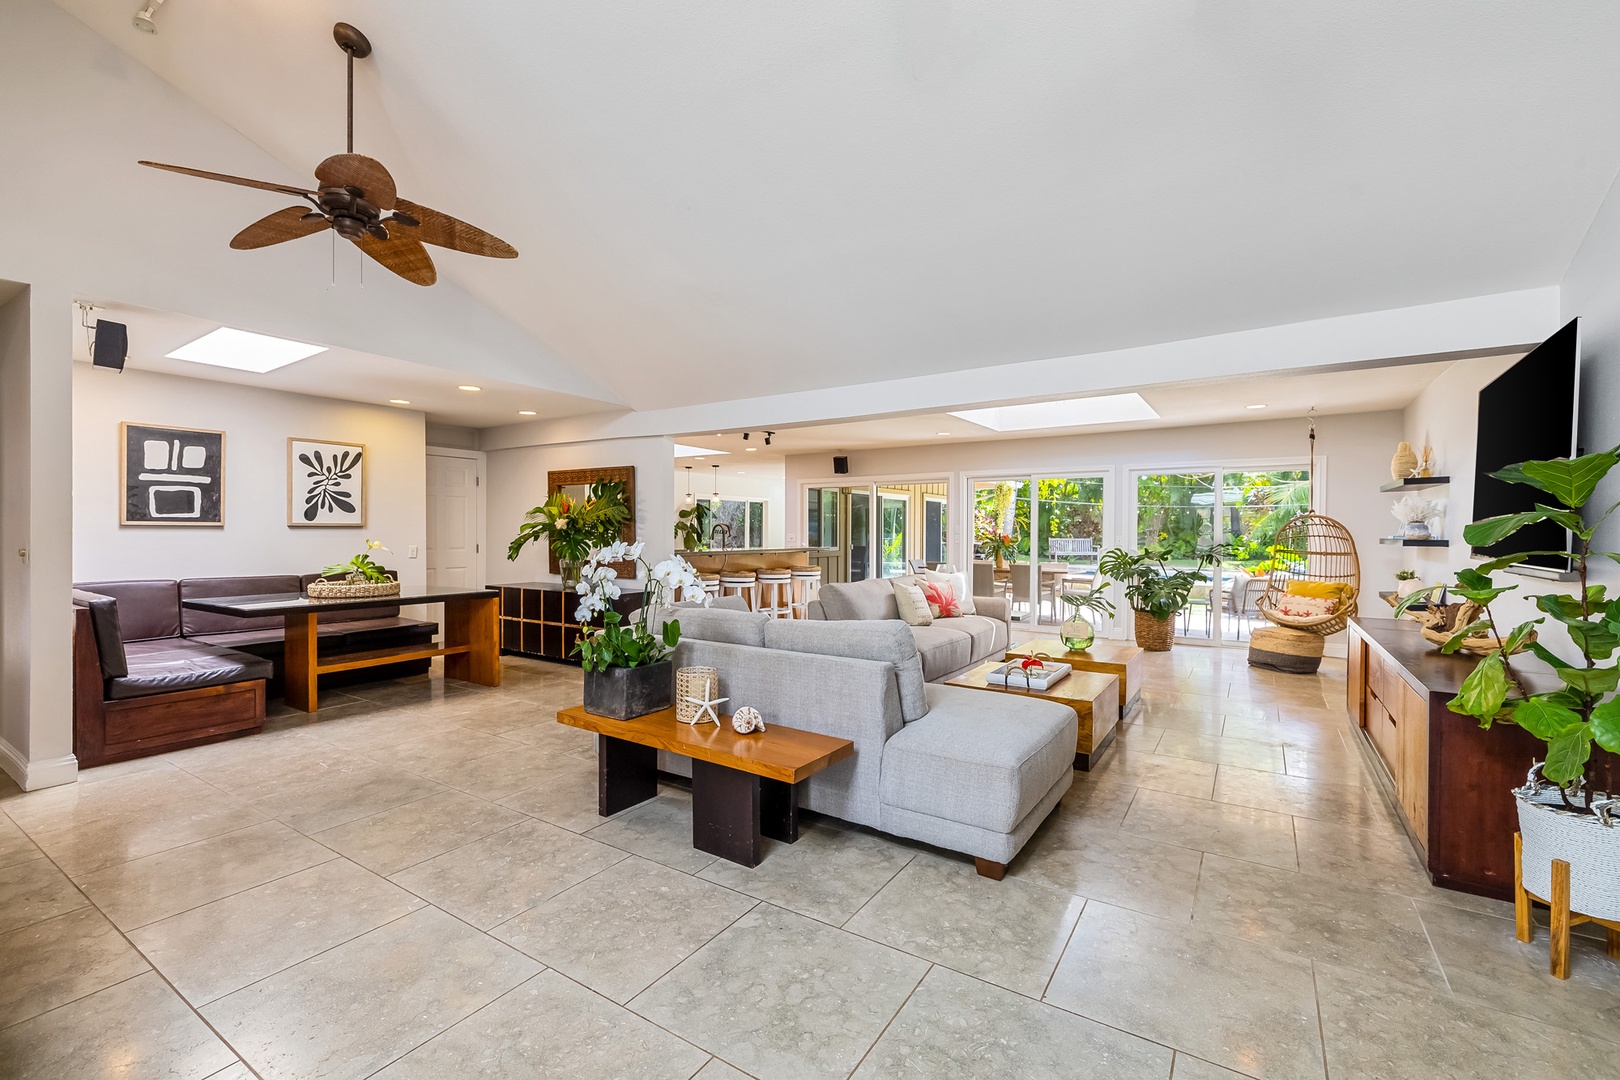 Honolulu Vacation Rentals, Hale Ho'omaha - The expansive living area is ideal for entertaining